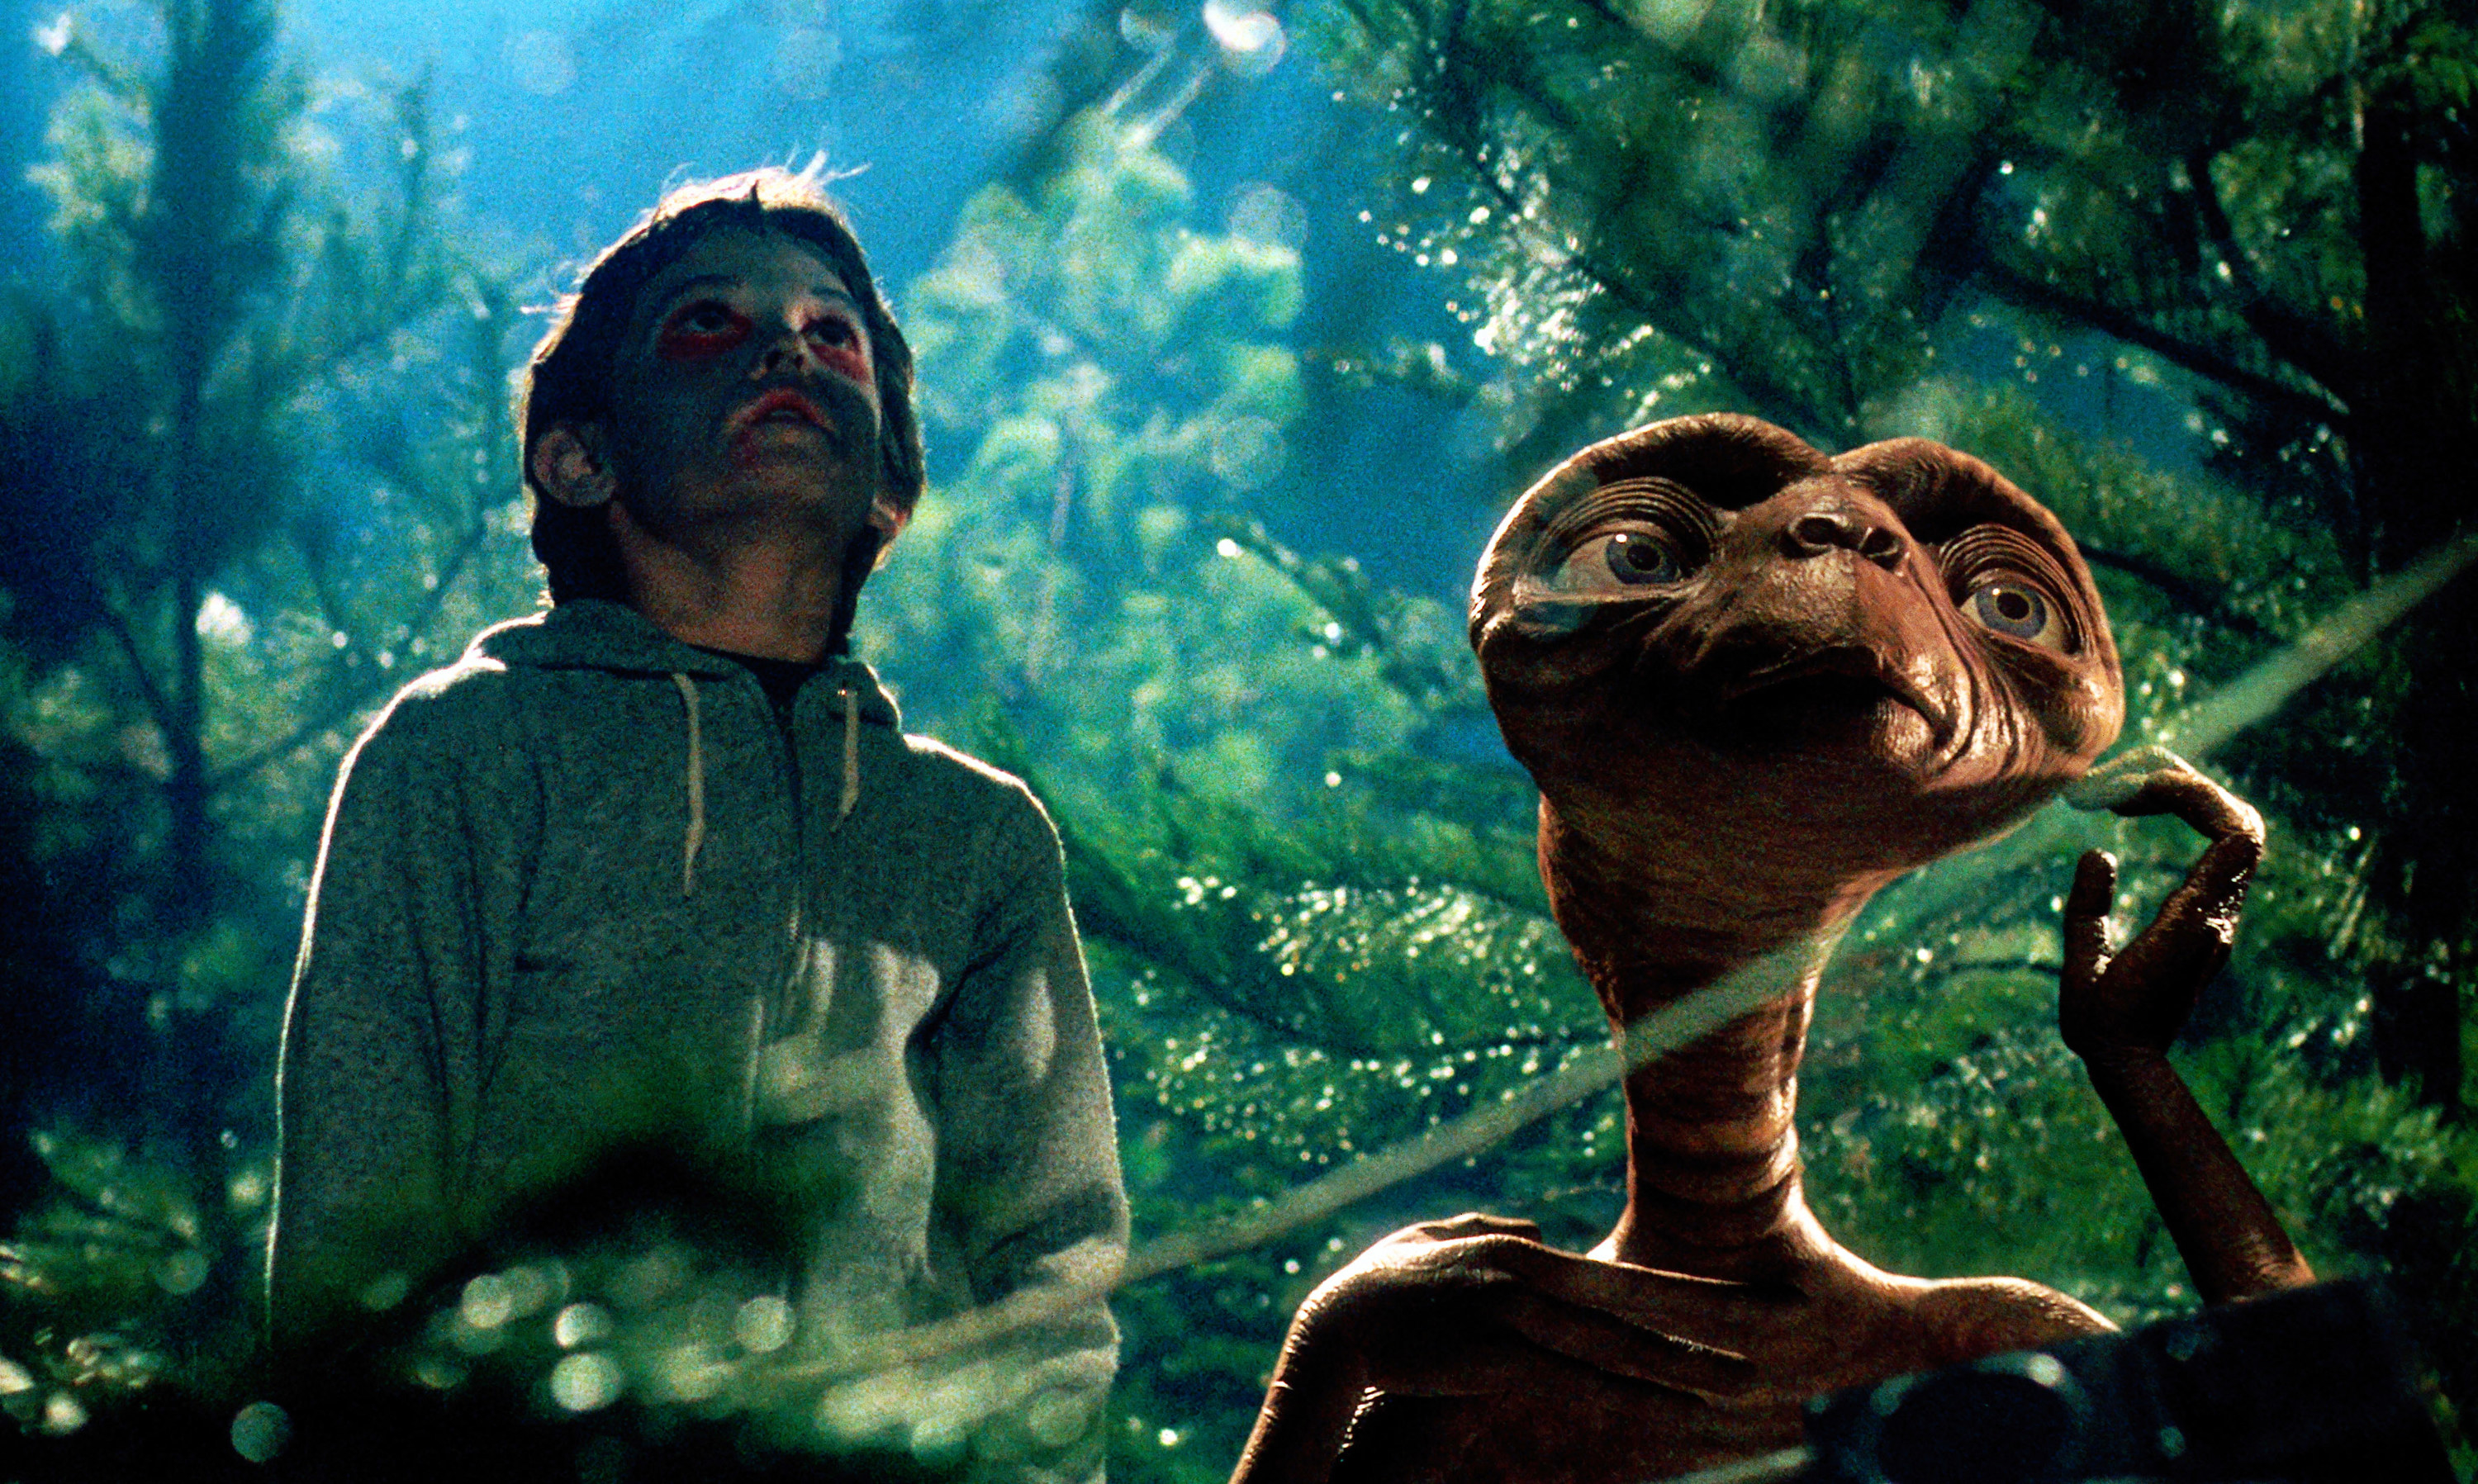 Henry Thomas and E.T. looking up at the sky.